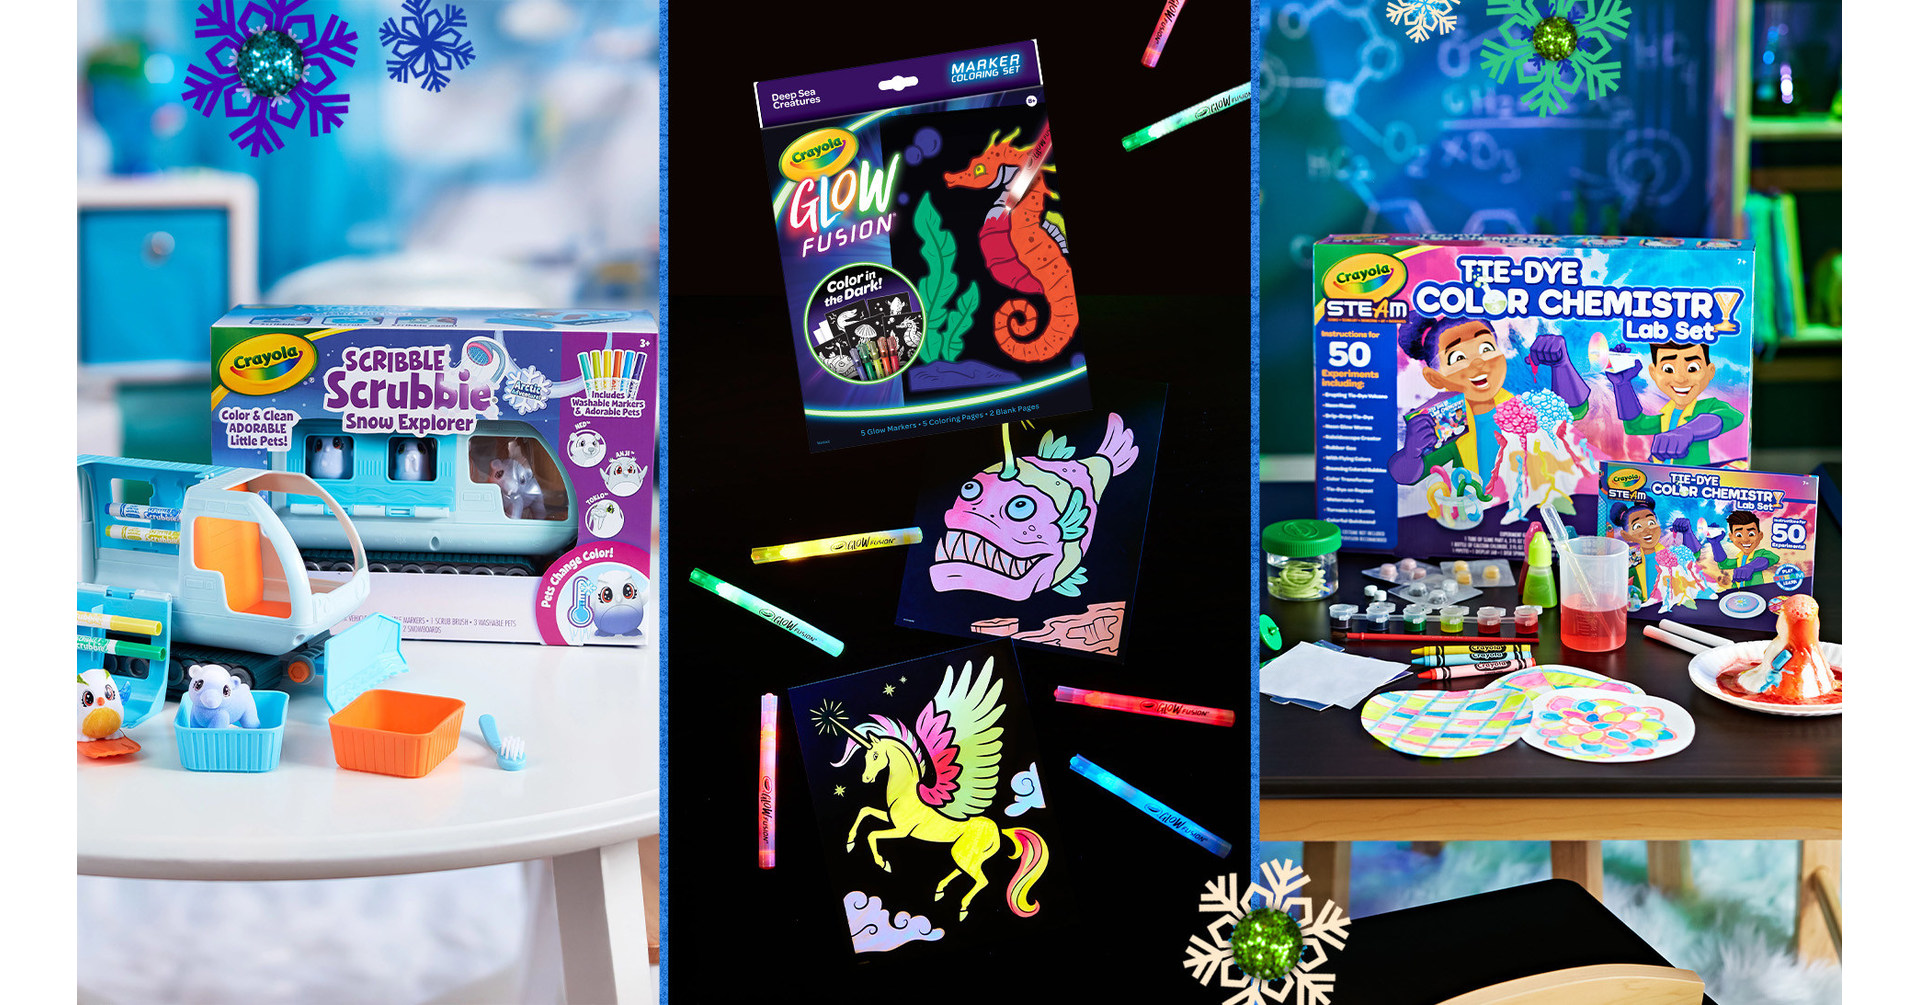 Crayola Gets Creative this Holiday Season with Innovative Color Play, Glow-in-the-Dark and STEAM Toy Offerings